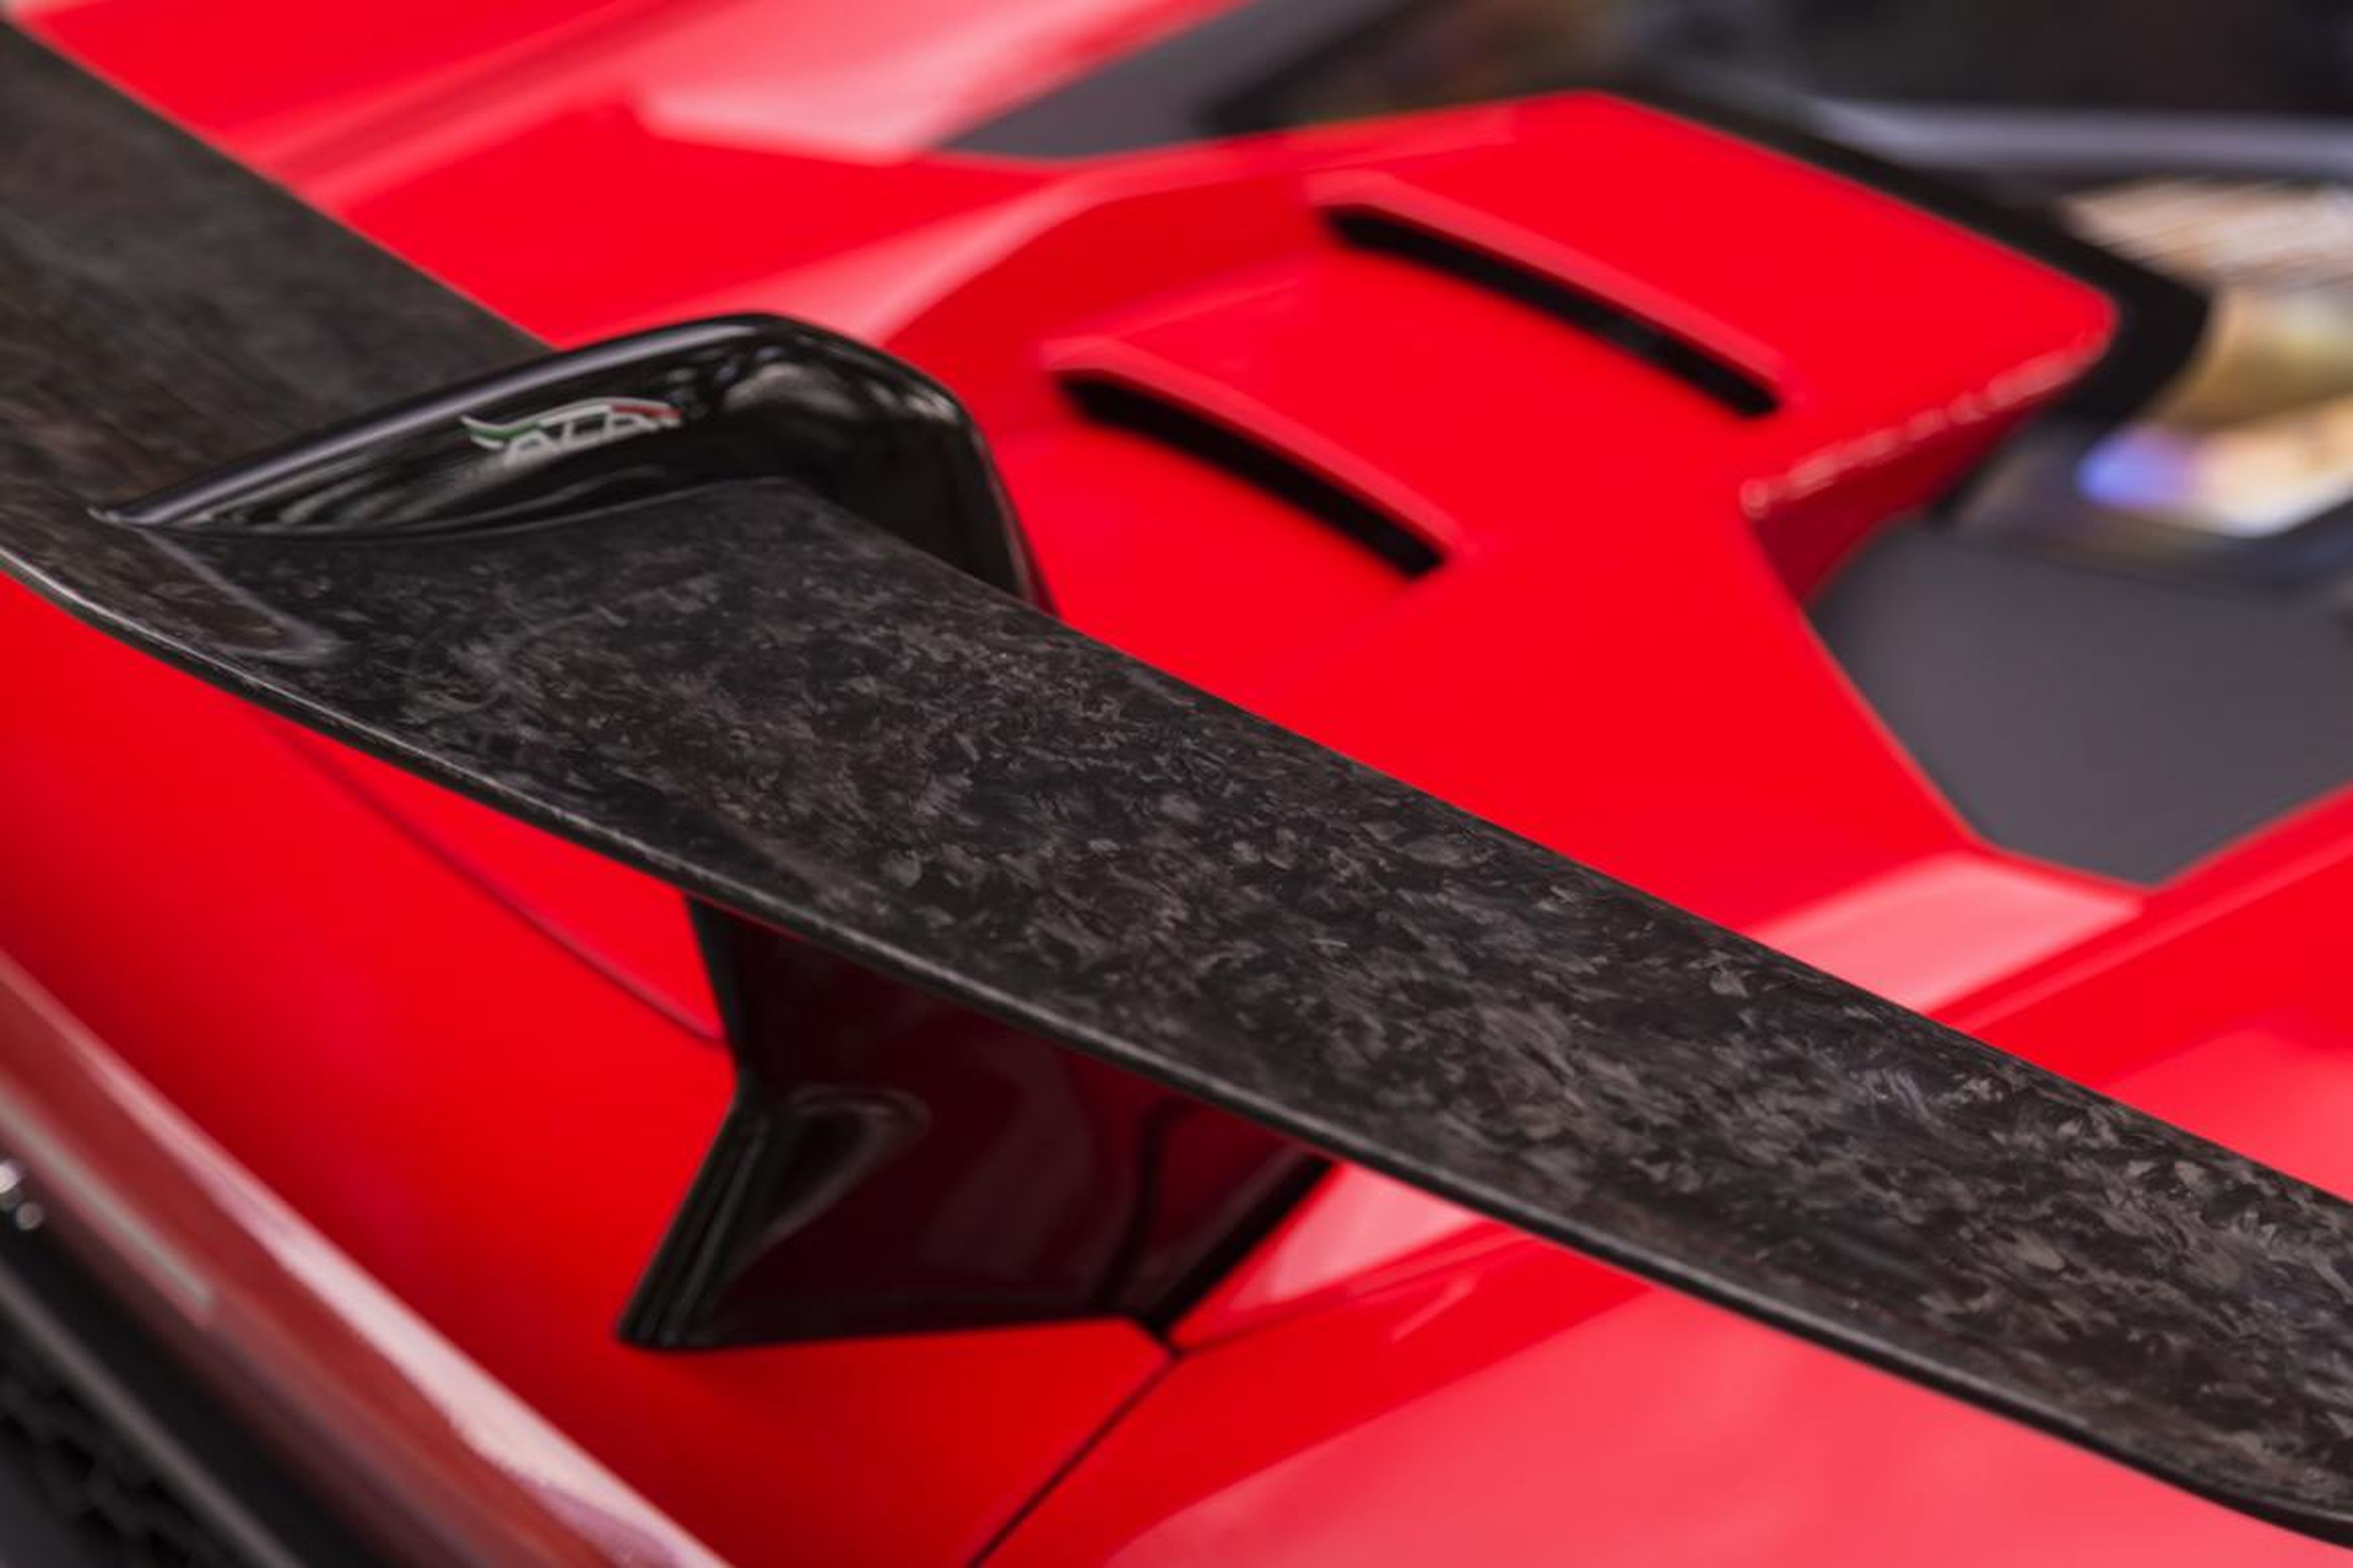 Look closely and you can see that it's made of Lamborghini's Forged Composite material, a type or carbon fiber that's compressed rather than woven. That's what accounts for the cool patterning.